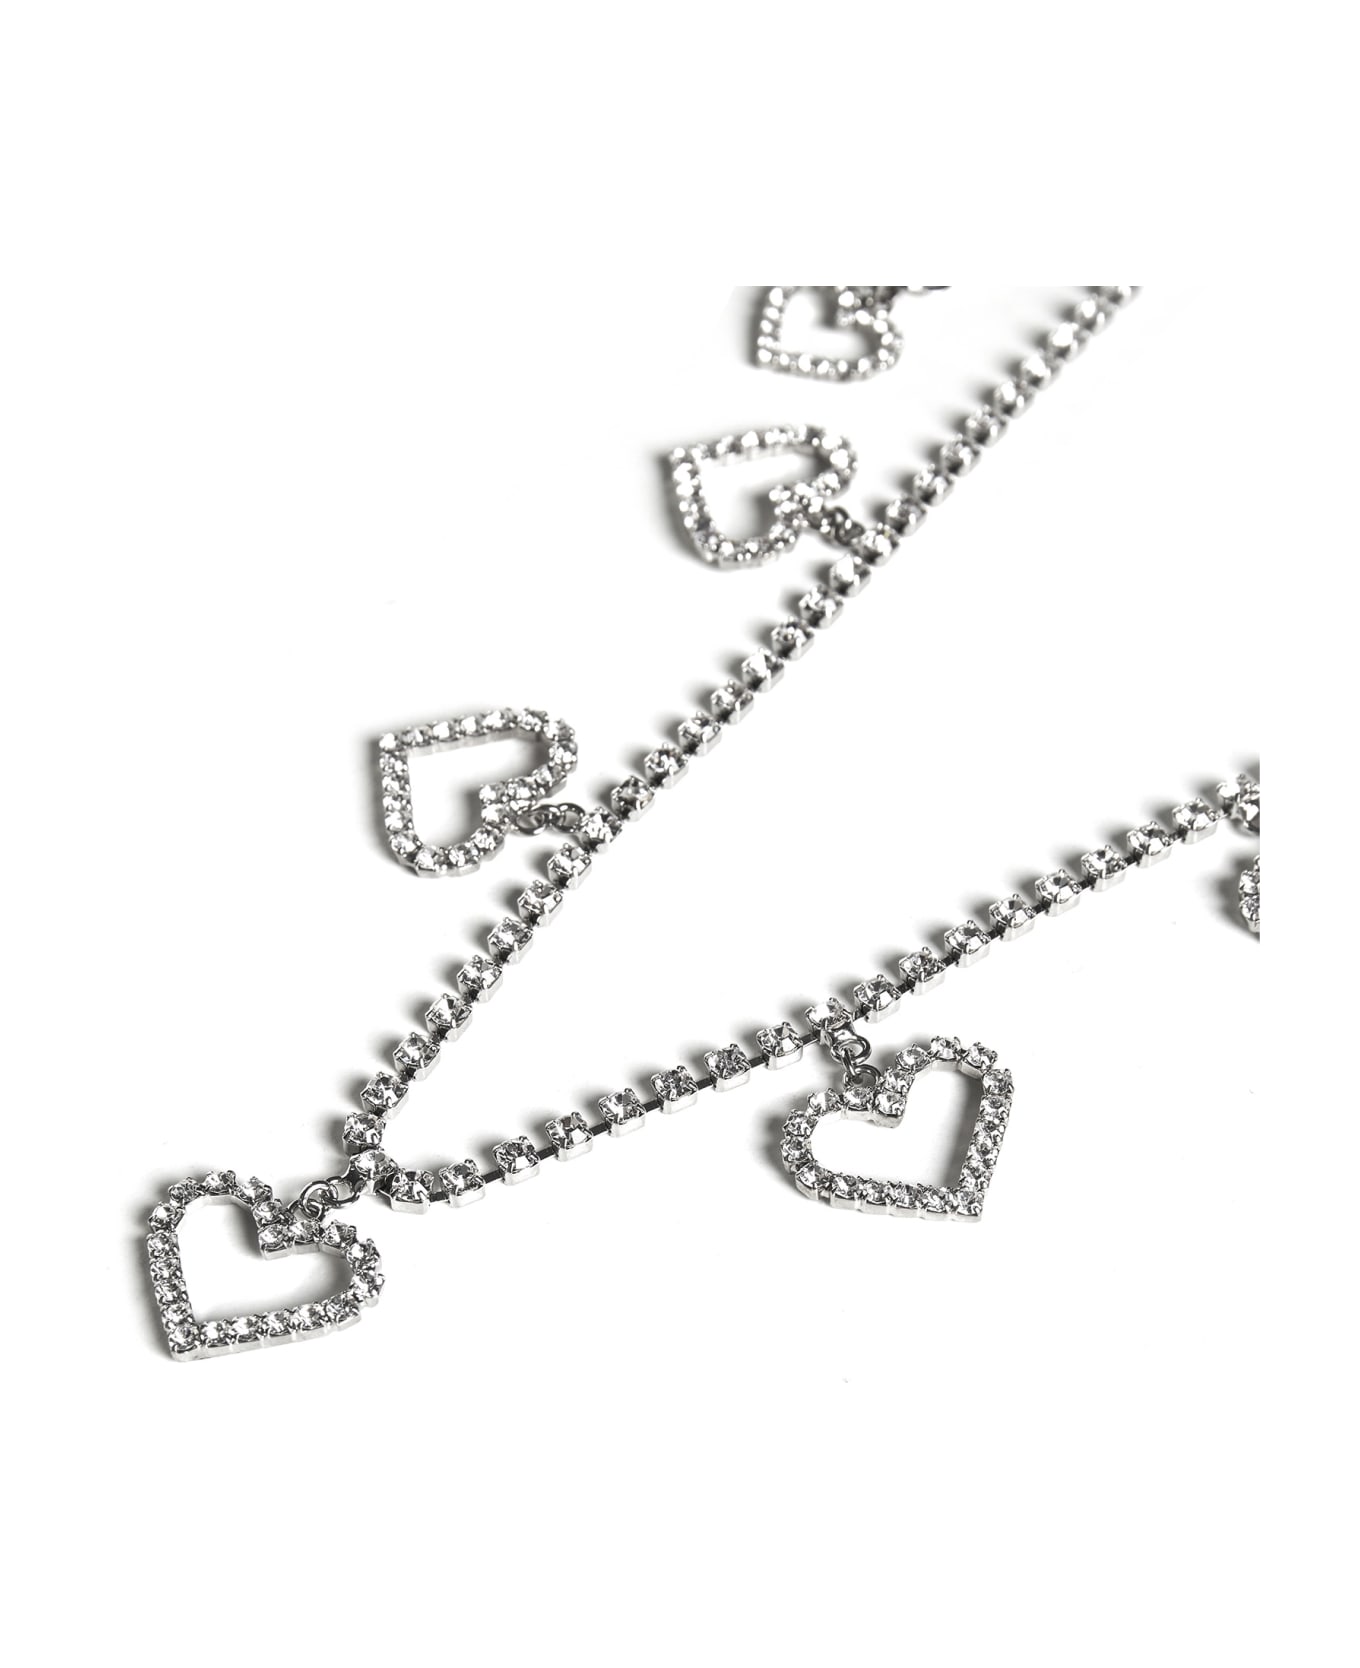 Alessandra Rich Necklace - Cry silver